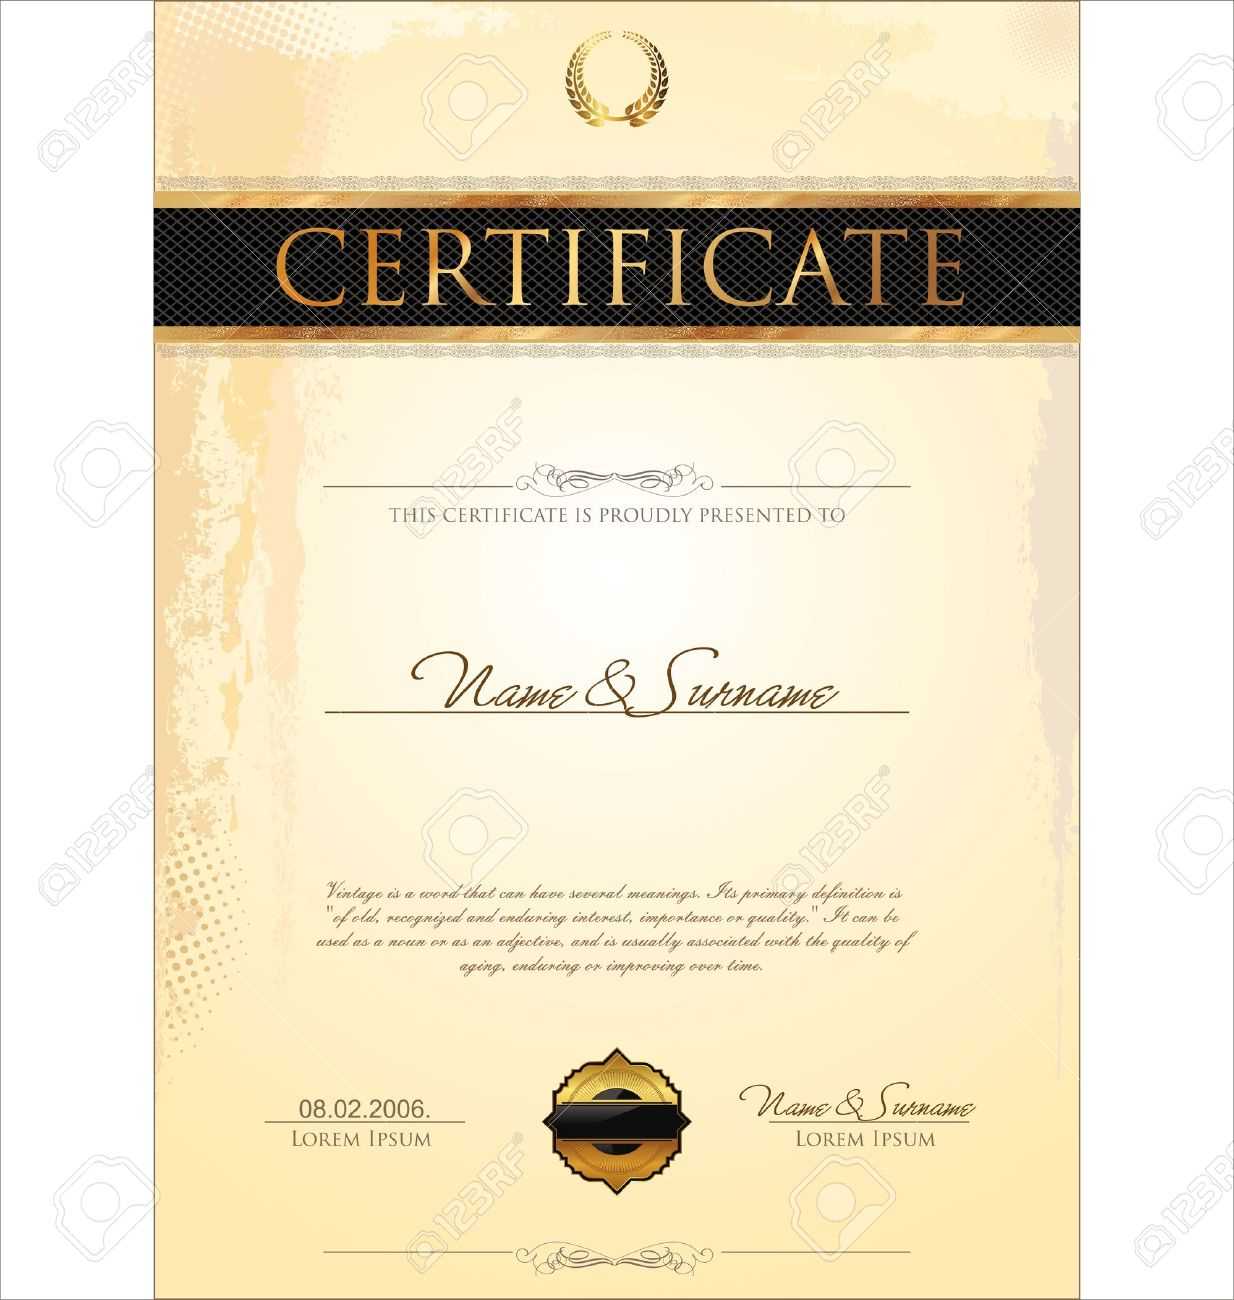 Certificate Template Intended For Free Stock Certificate Template Download